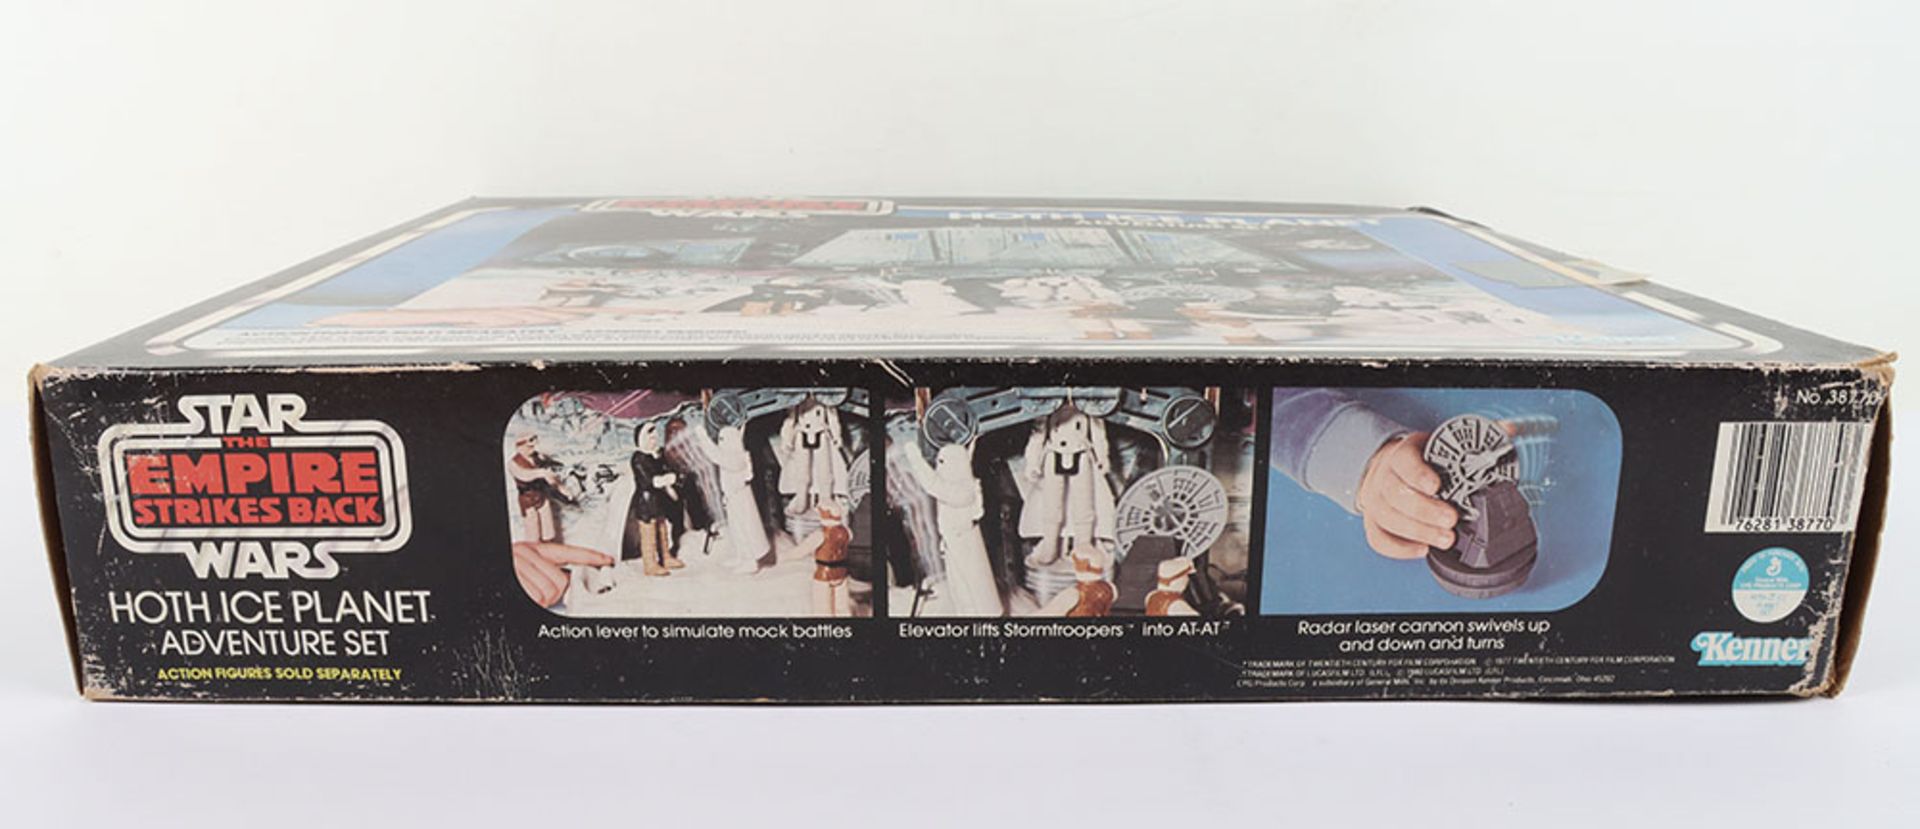 Boxed Vintage Kenner Star Wars The Empire Strikes Back Hoth Ice Planet Adventure Set - Image 15 of 16